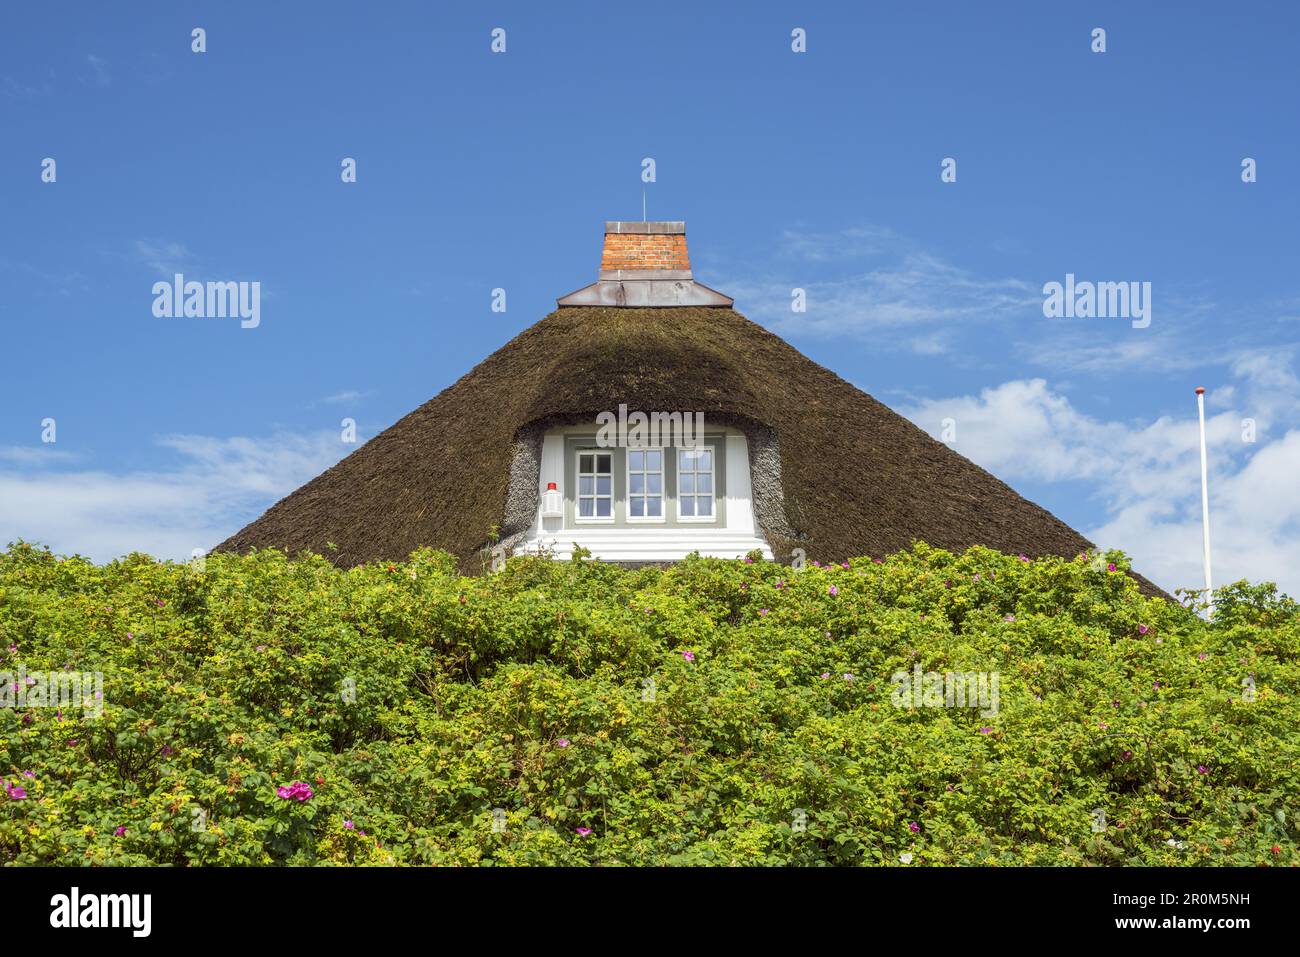 Thatched house in Hörnum, North Frisian Island Sylt, North Sea coast, Schleswig-Holstein, Northern Germany, Germany, Europe Stock Photo